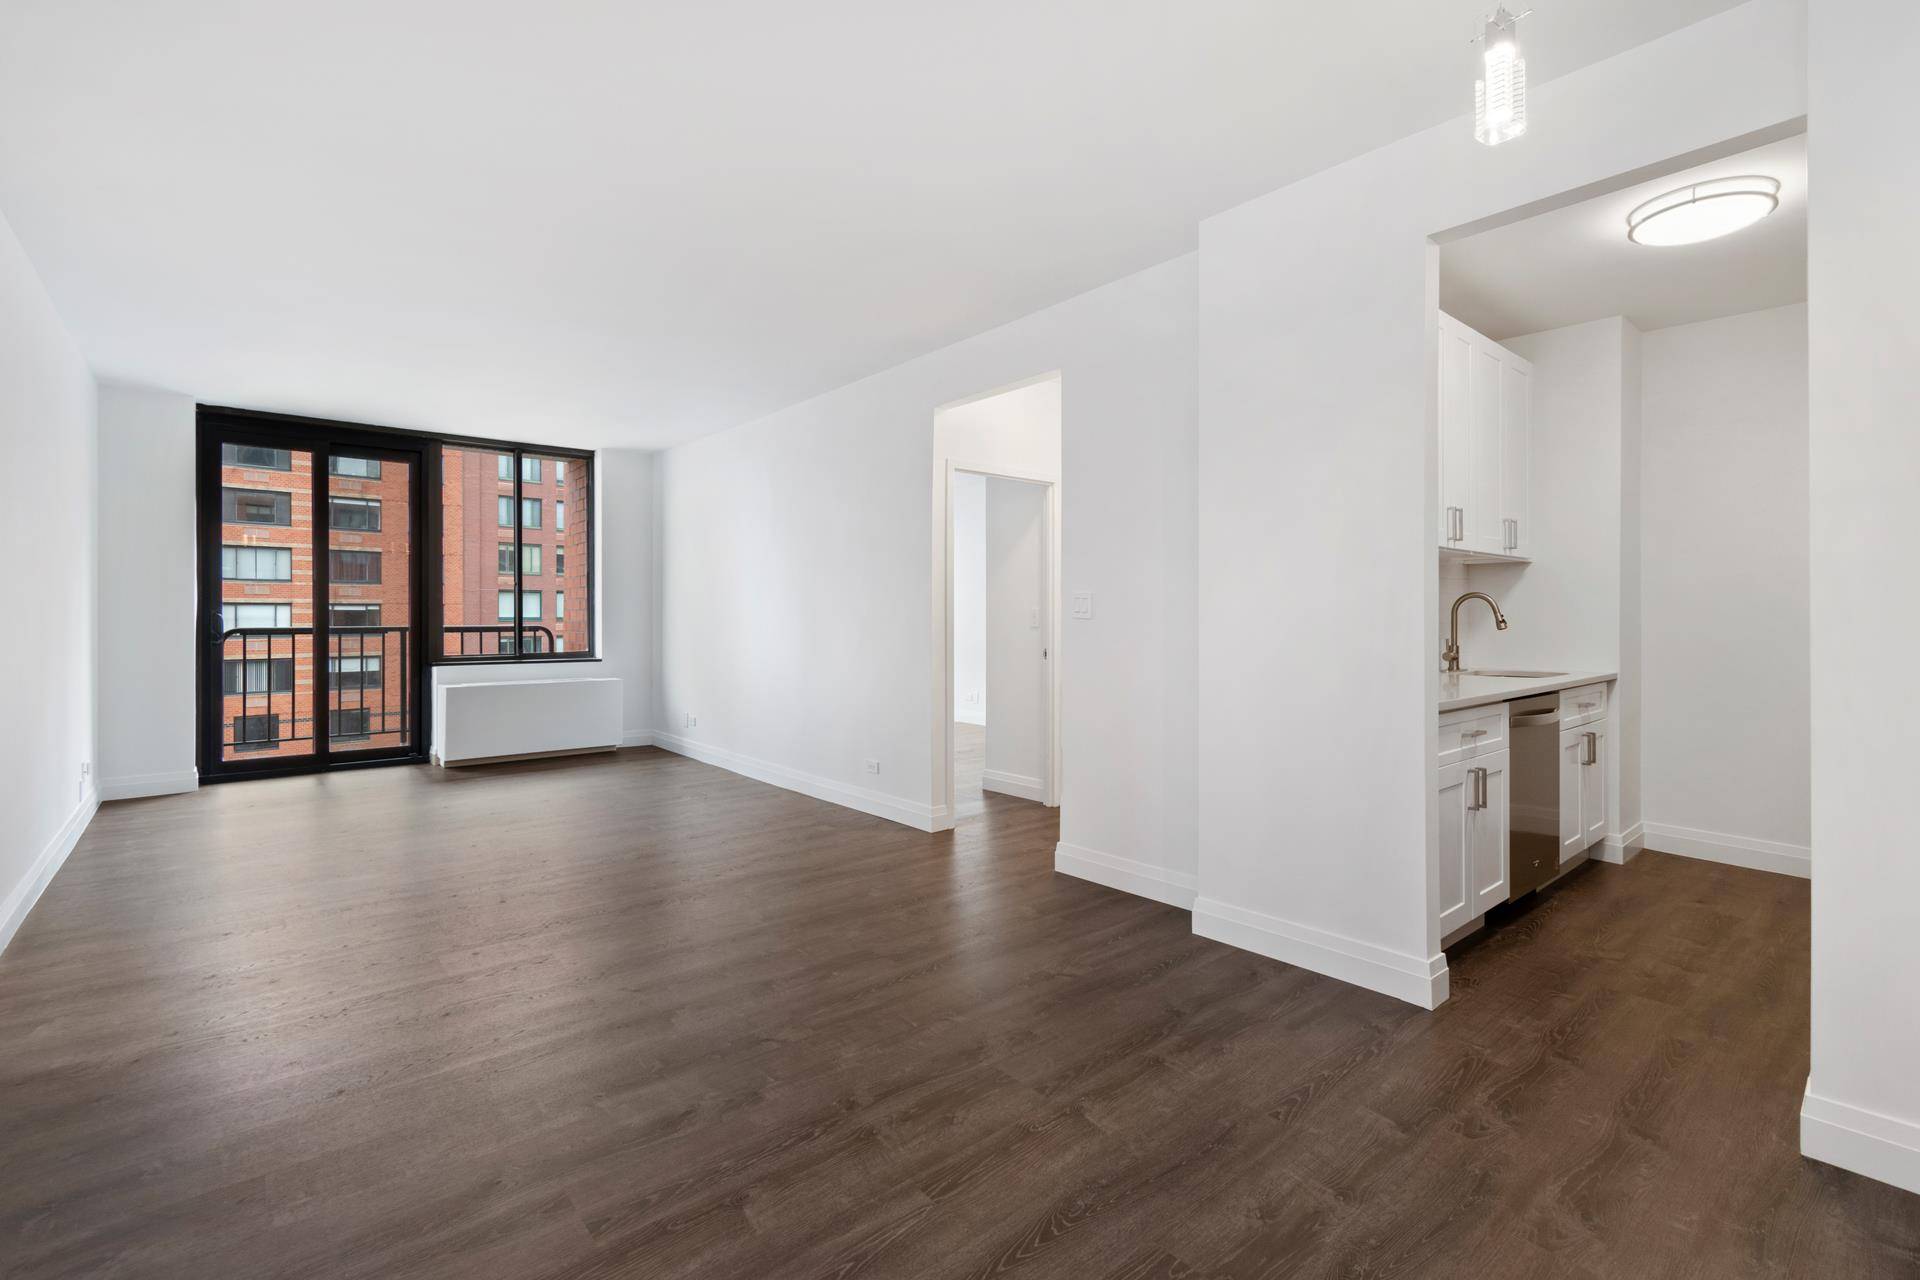 Brand new gut renovated 2 bedroom, 2 bathroom with direct Hudson River views in a full service luxury condominium.